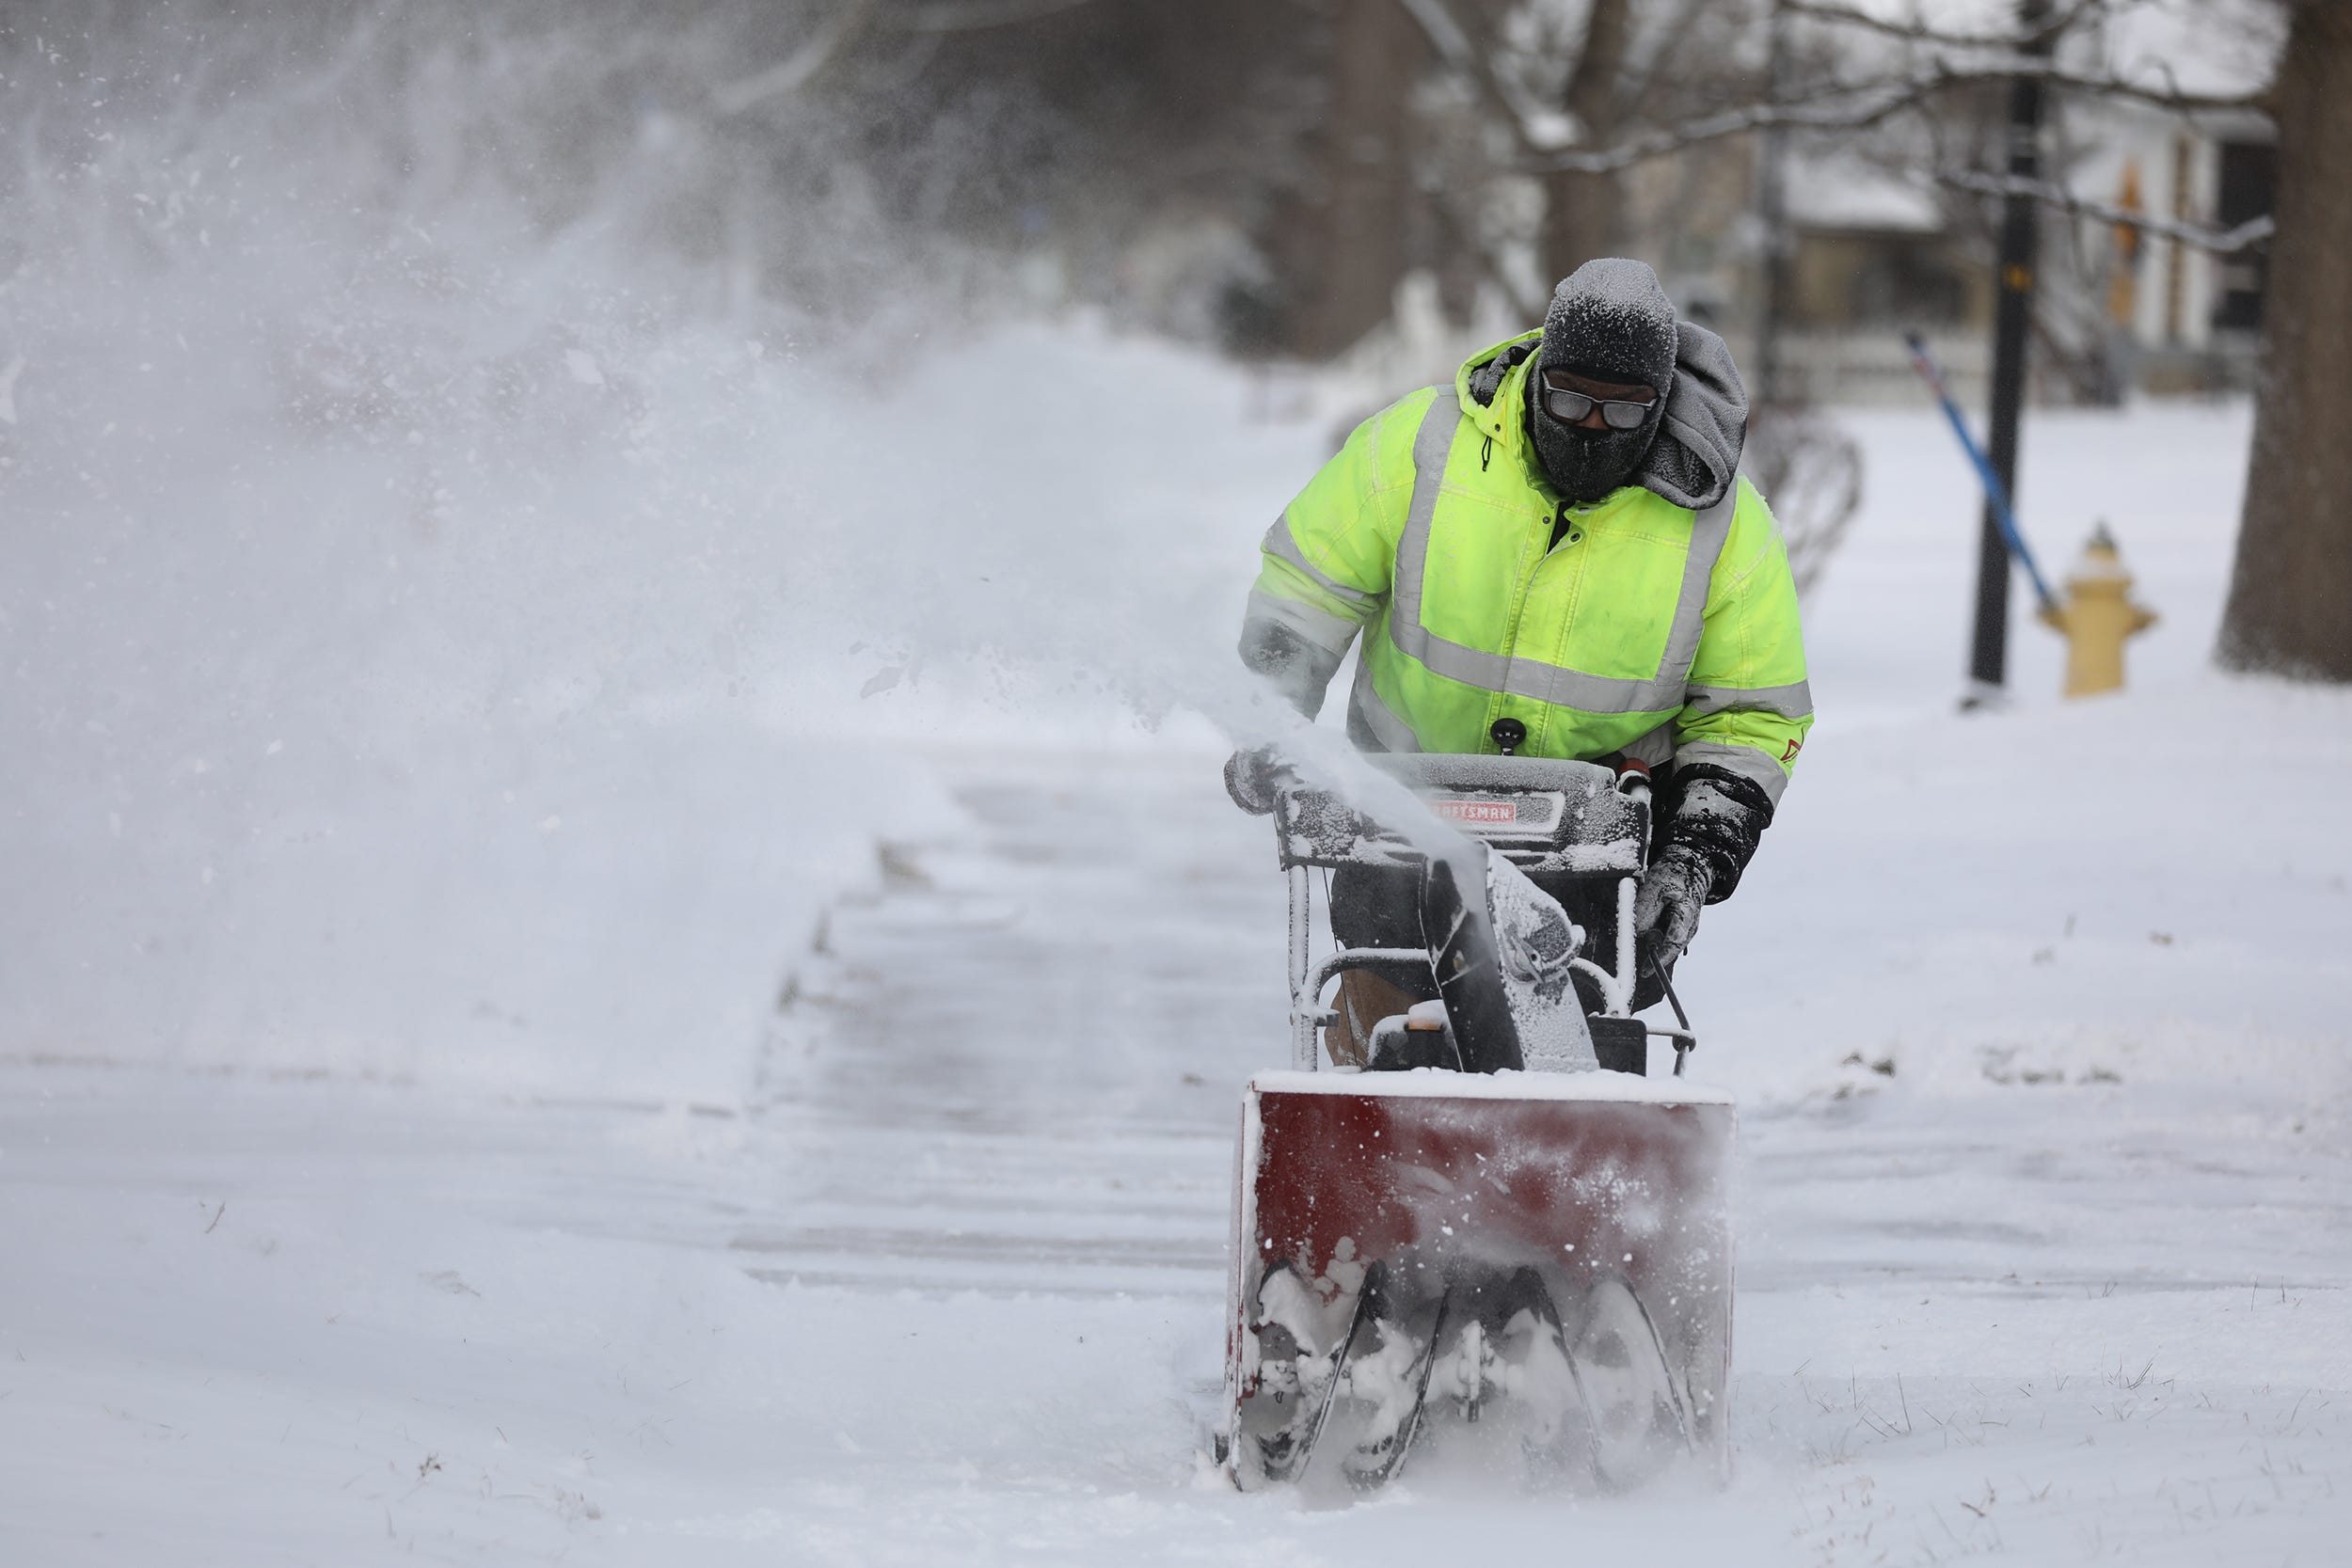 60M Americans in path of massive winter storm; snow and ice to cause major travel disruptions